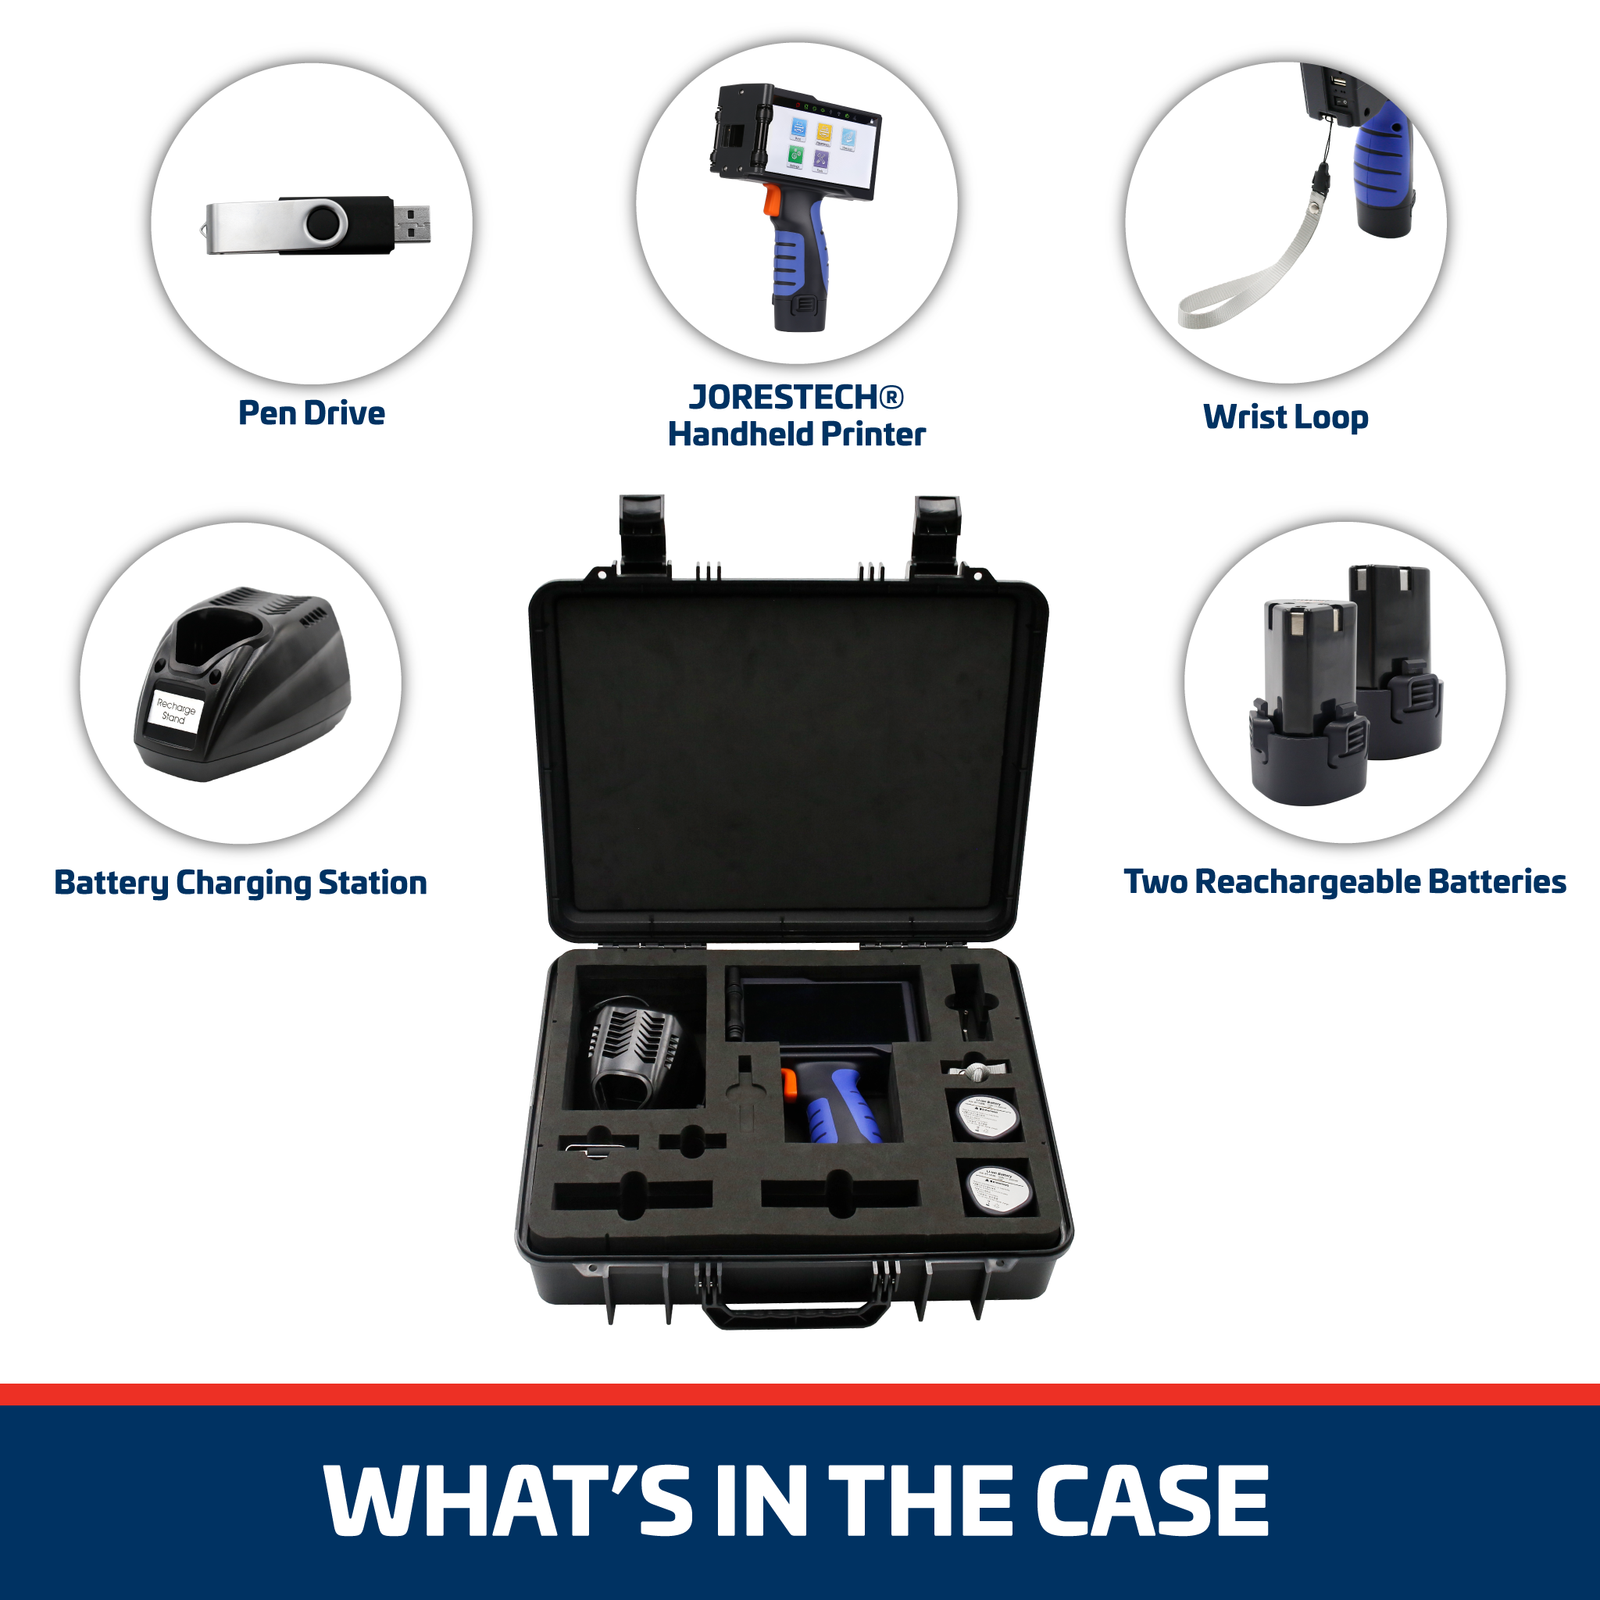 Shows what is inside the black carryon hard case. Zoomed ins show the battery charging station, a pen drive, the JORESTECH TIJ handheld inkjet coder, a wrist loop, and 2 rechargeable batteries